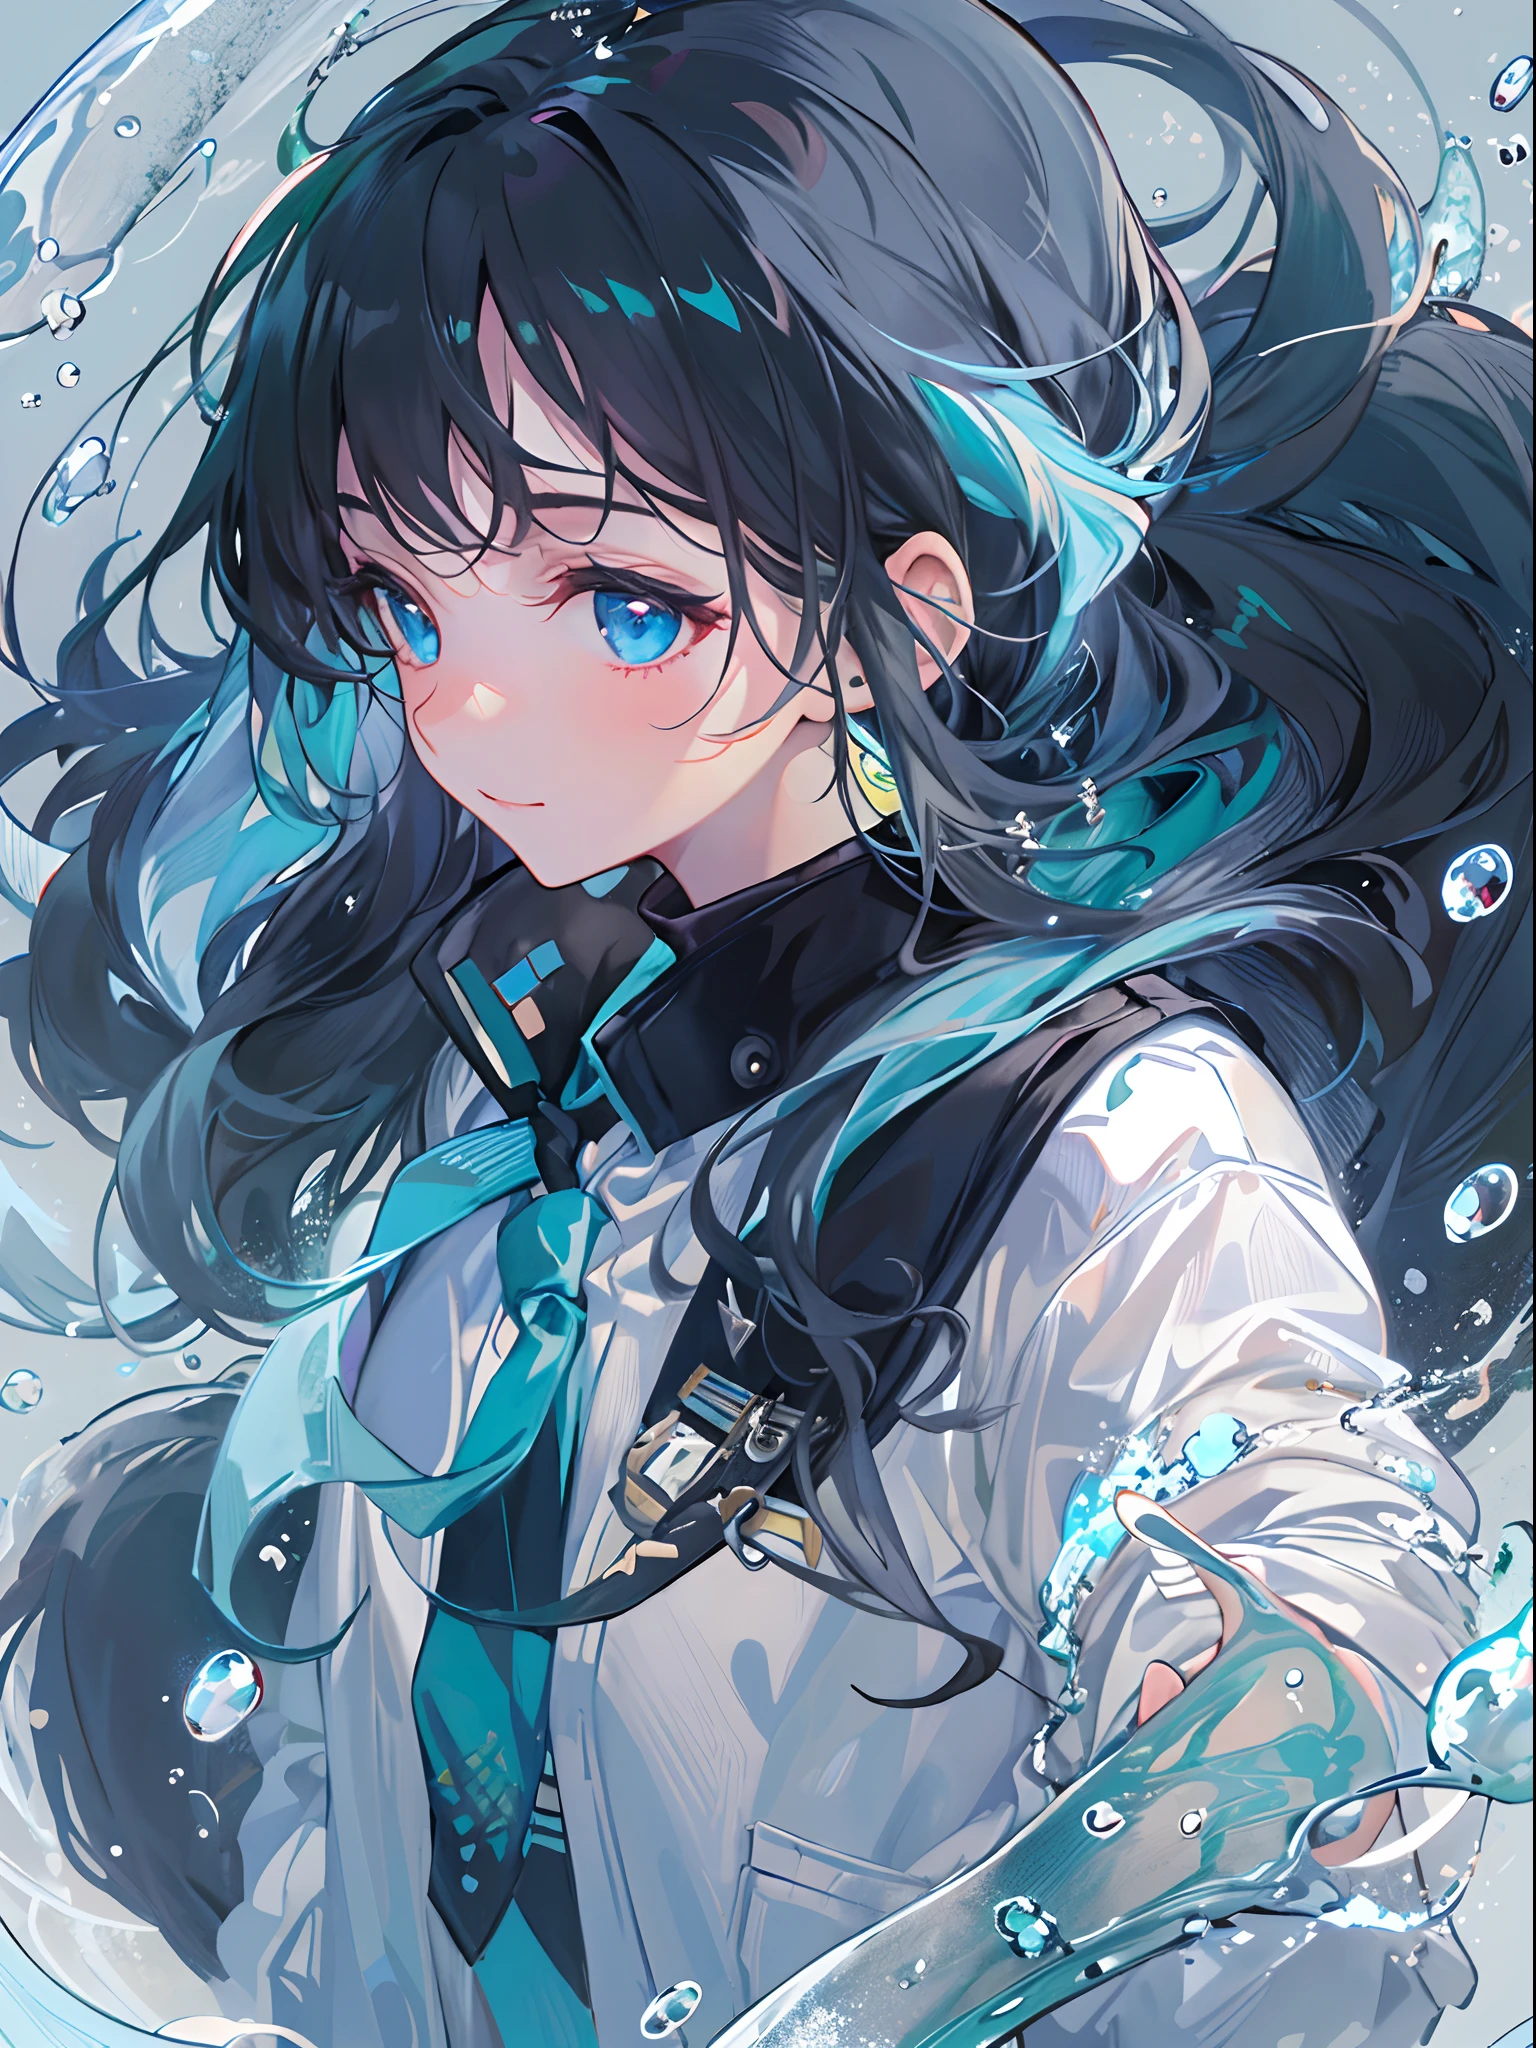 ((top-quality)), ((​masterpiece)), ((Ultra-detail)), (extremely delicate and beautiful), girl with, solo, cold attitude,((Black jacket)),She is very(relax)with  the(Settled down)Looks,A darK-haired, depth of fields,evil smile,Bubble, under the water, Air bubble,bright light blue eyes,Inner color with black hair and light blue tips,Cold background,Bob Hair - Linear Art, shortpants、knee high socks、White uniform like 、Light blue ribbon ties、Clothes are sheer、Hands in pockets、Ponytail hair